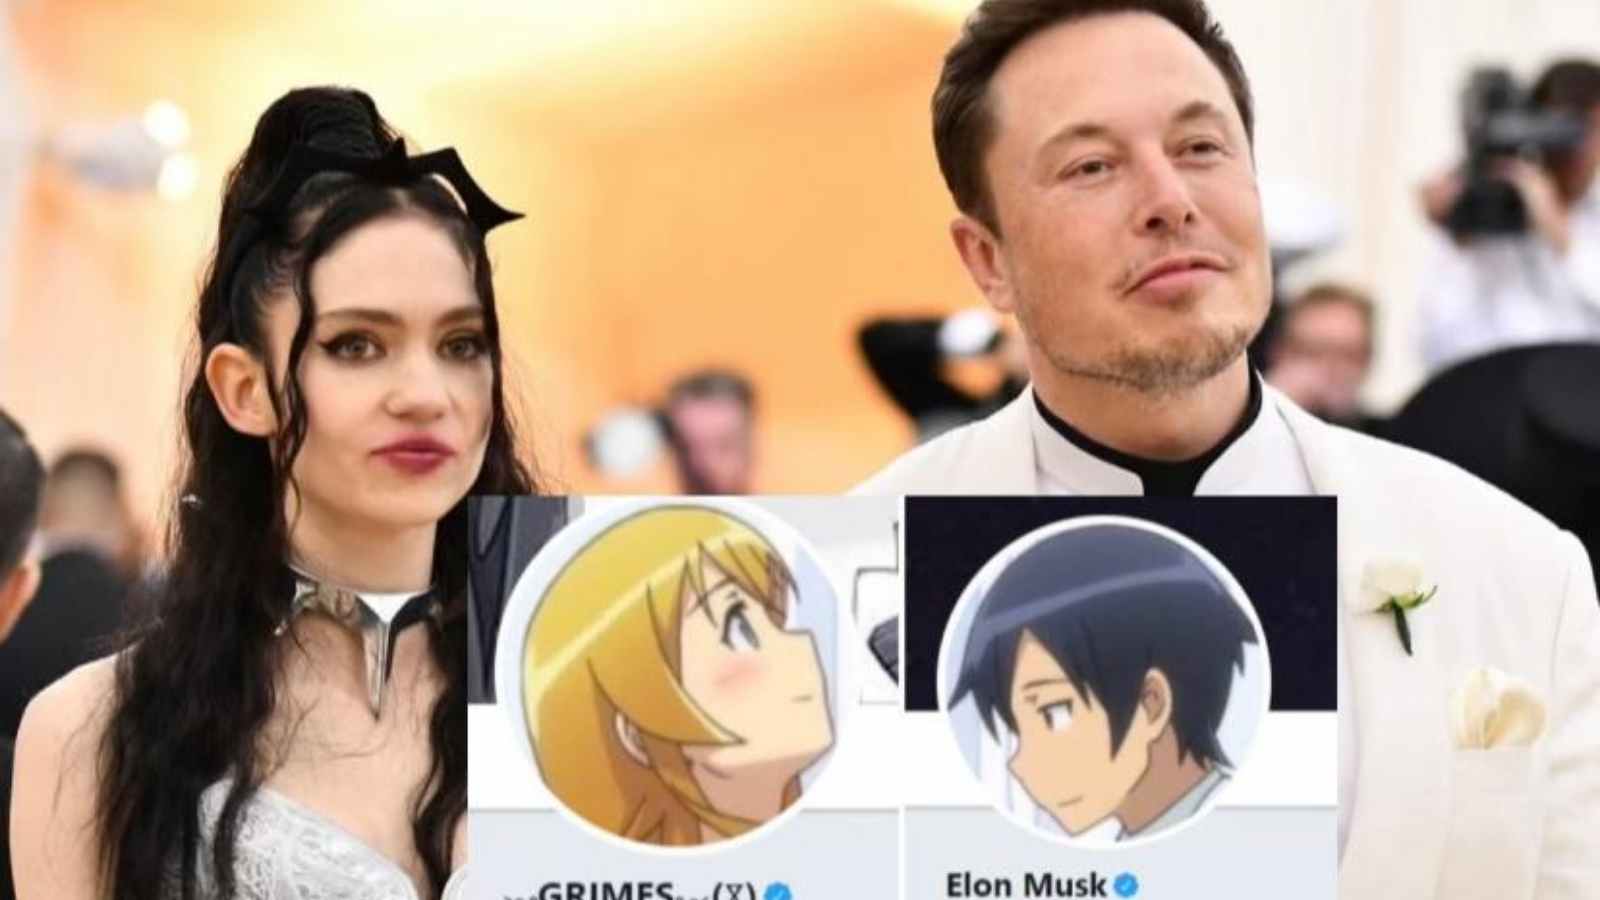 Elon Musk slid into Grimes' Twitter DMs and bonded over one of her nerdy AI jokes.